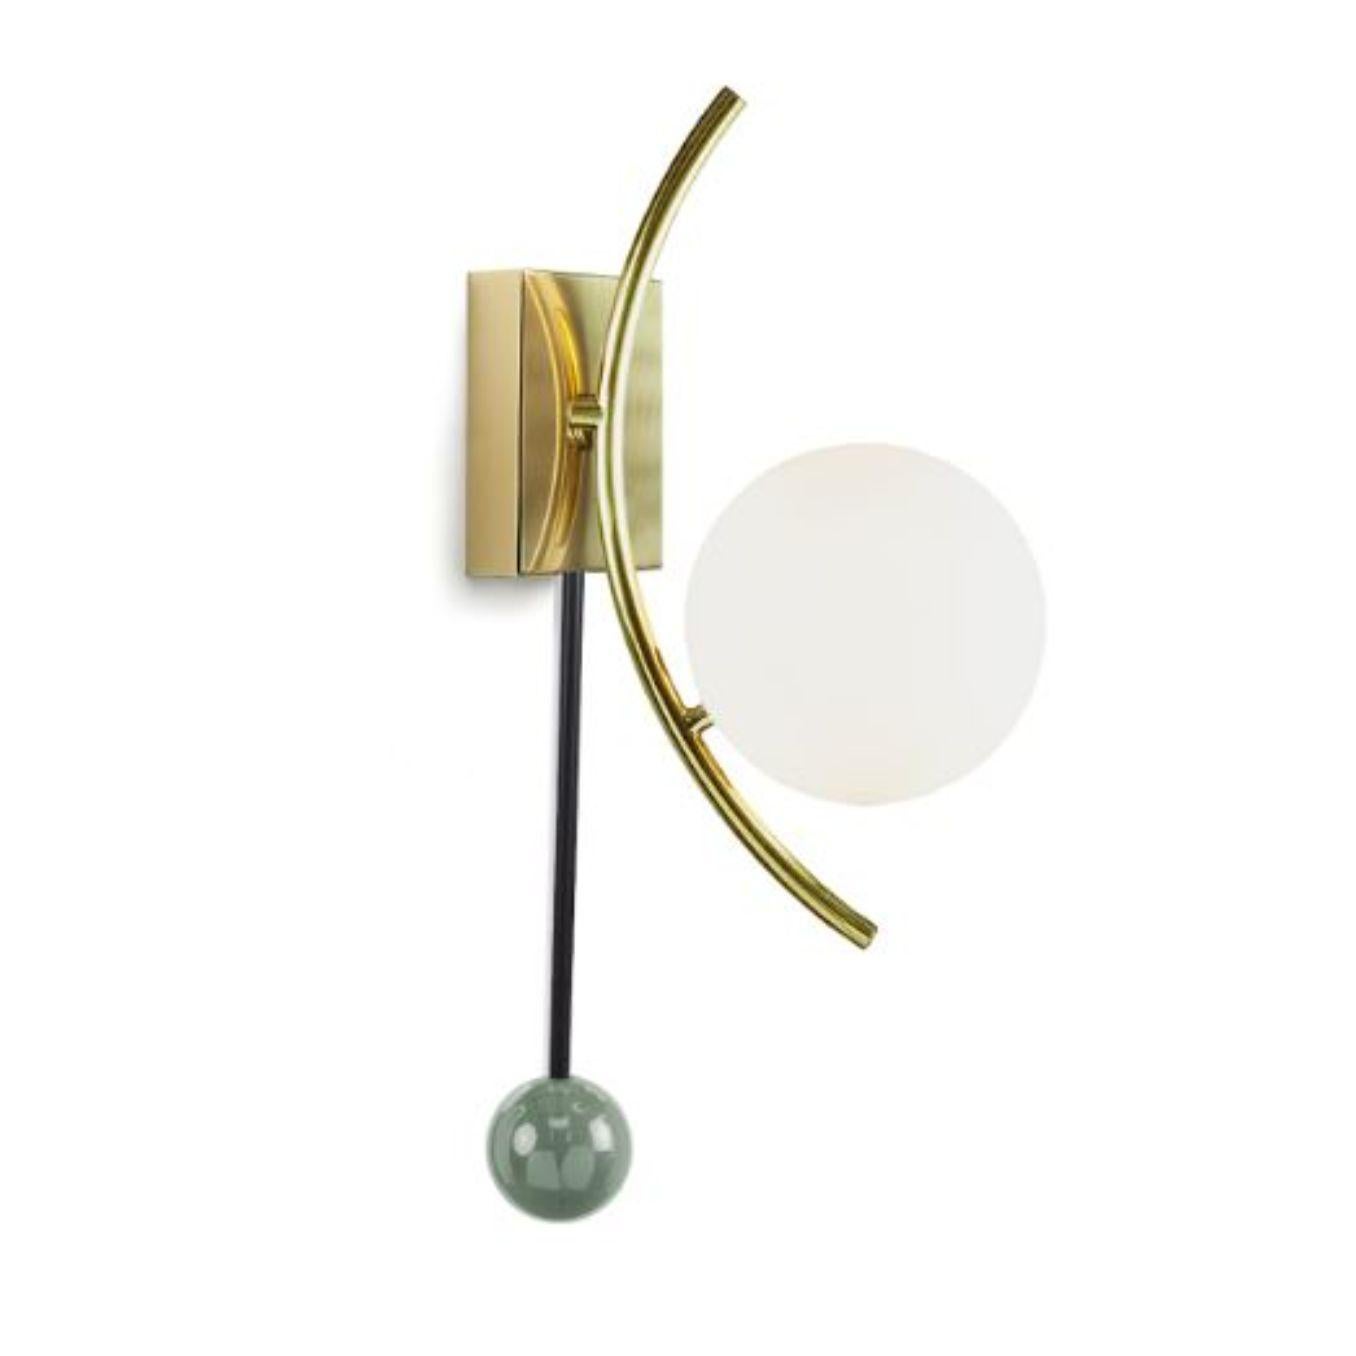 Aloe Helio wall lamp by Dooq
Dimensions: W 15 x D 27 x H 60 cm
Materials: lacquered metal, brass/nickel.
Also available in different colours and materials.

Information:
230V/50Hz
4 x max. G9
4W LED

120V/60Hz
4 x max. G9
4W LED

All